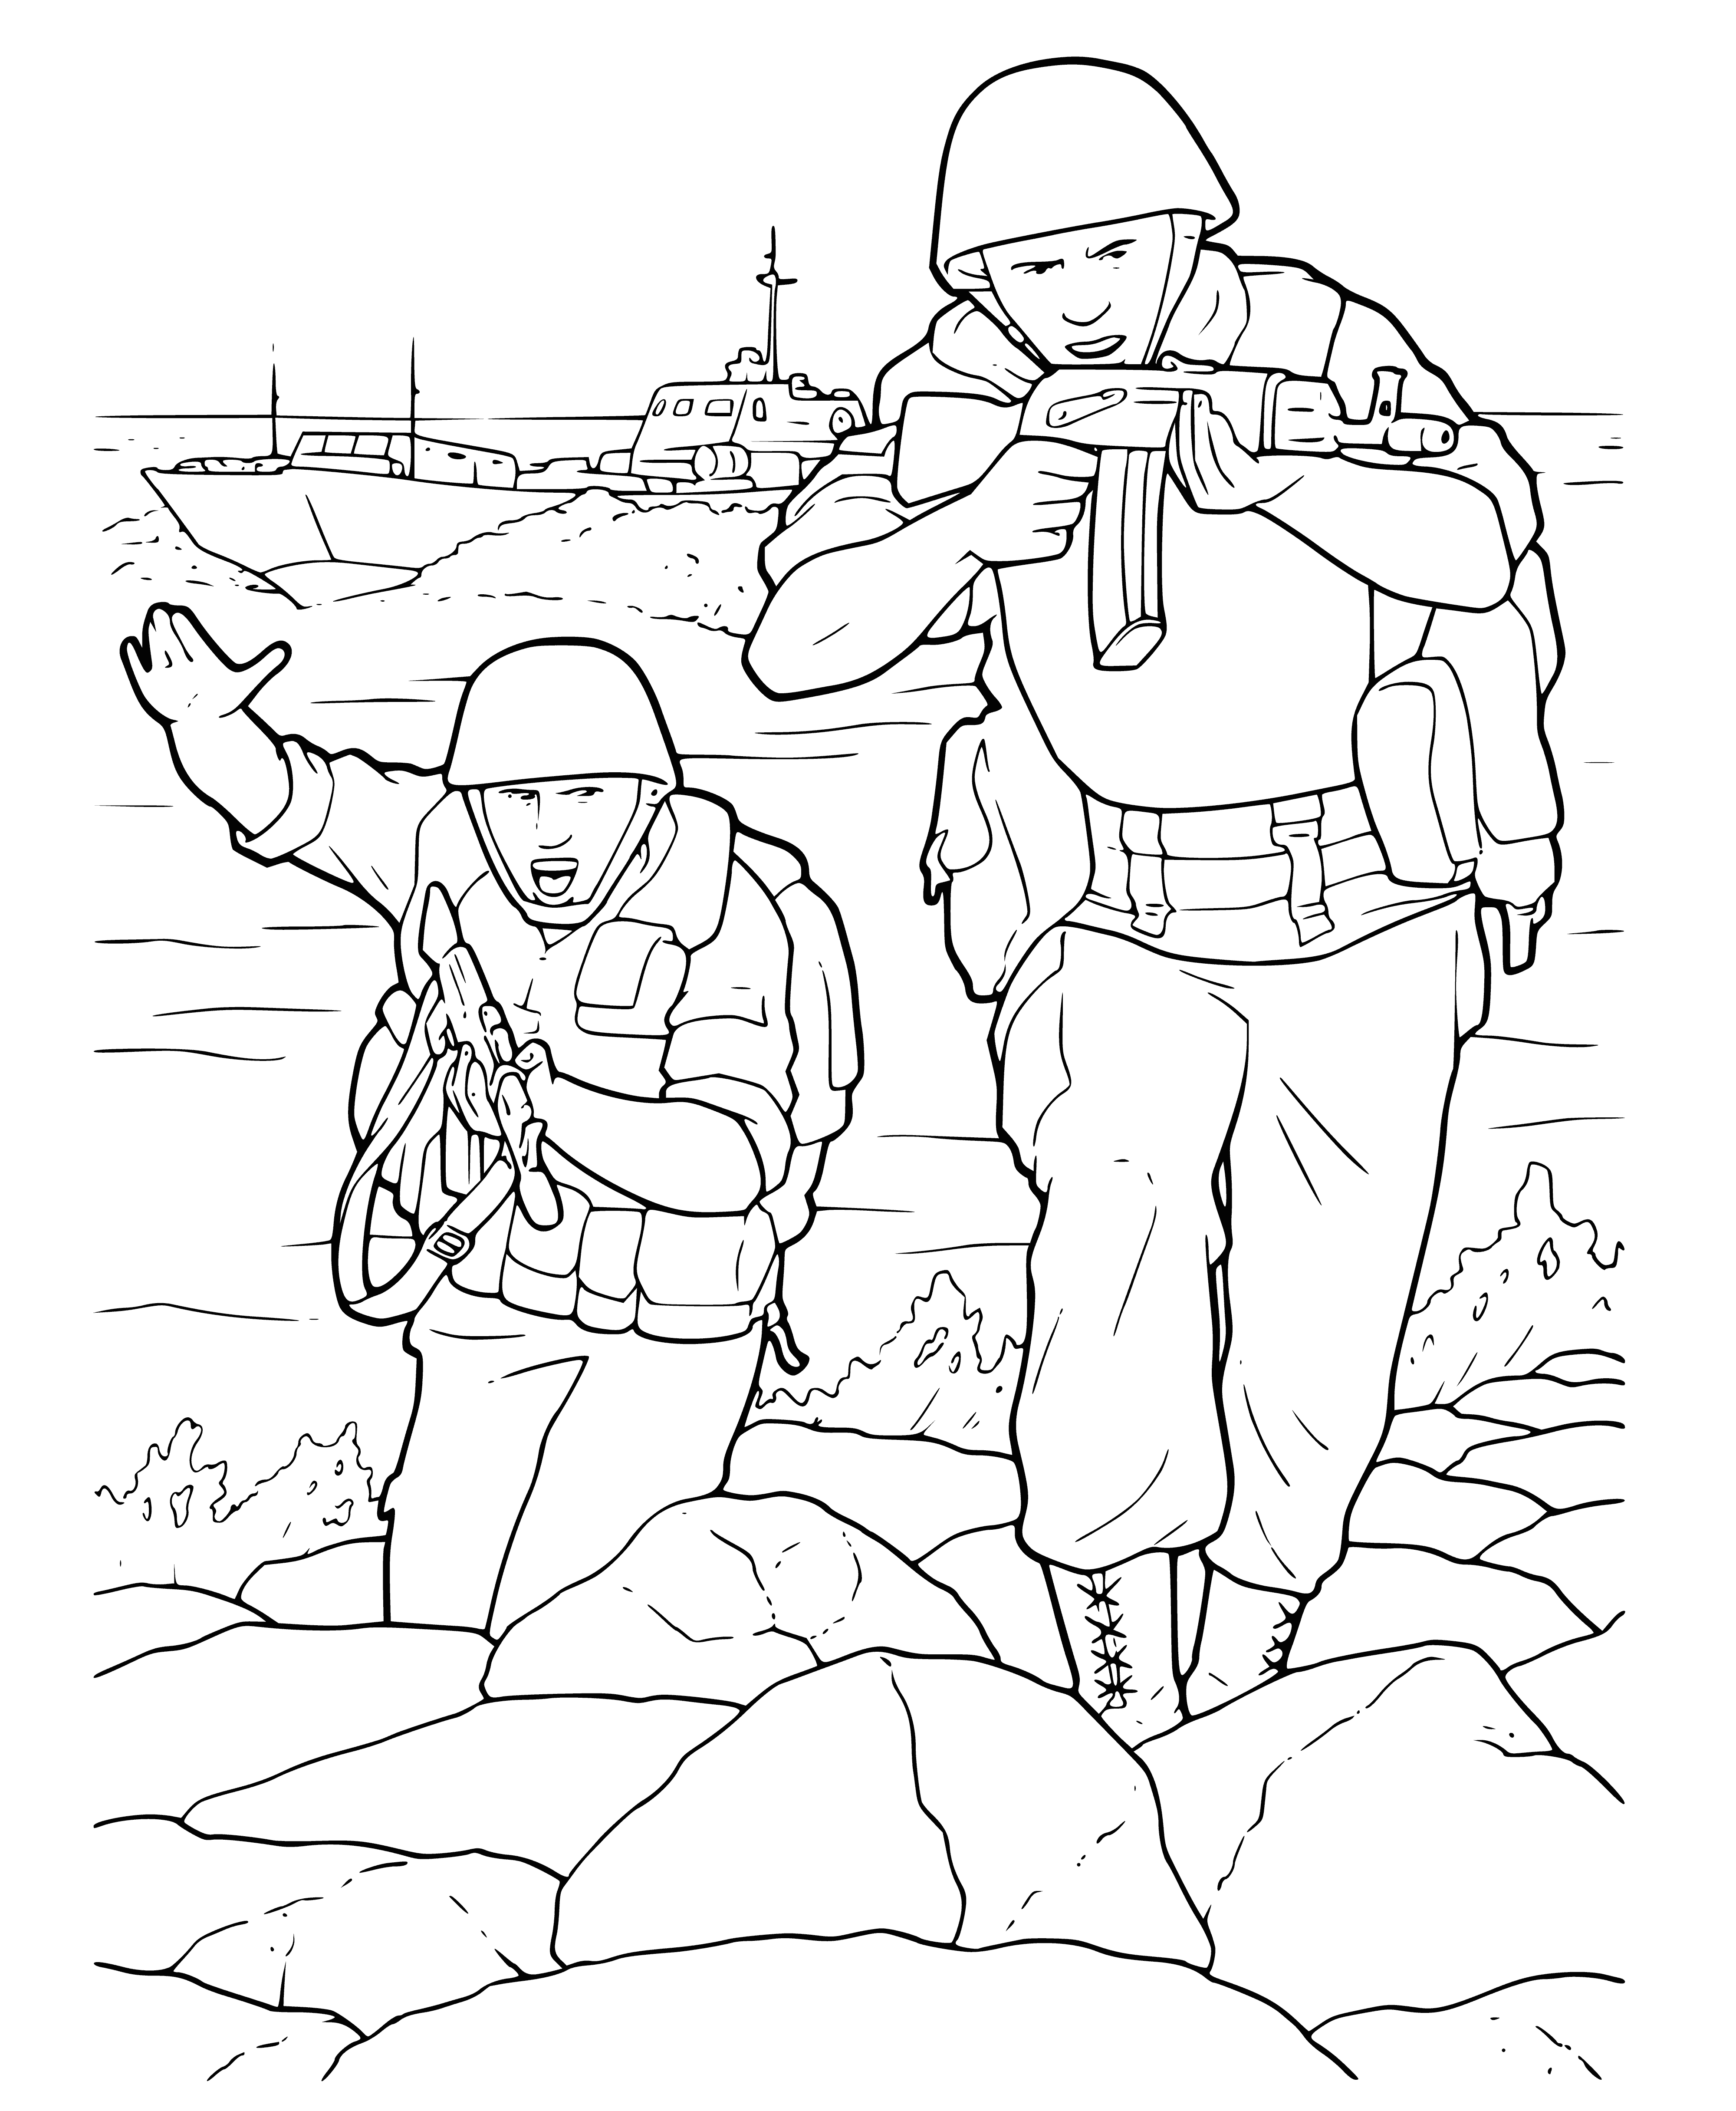 coloring page: 20 Marines w/ assault rifles, Kevlar vests, & combat gear standing ready for battle in front of an armored vehicle. Some have helmets, some have bandanas. All serious expressions ready for combat.